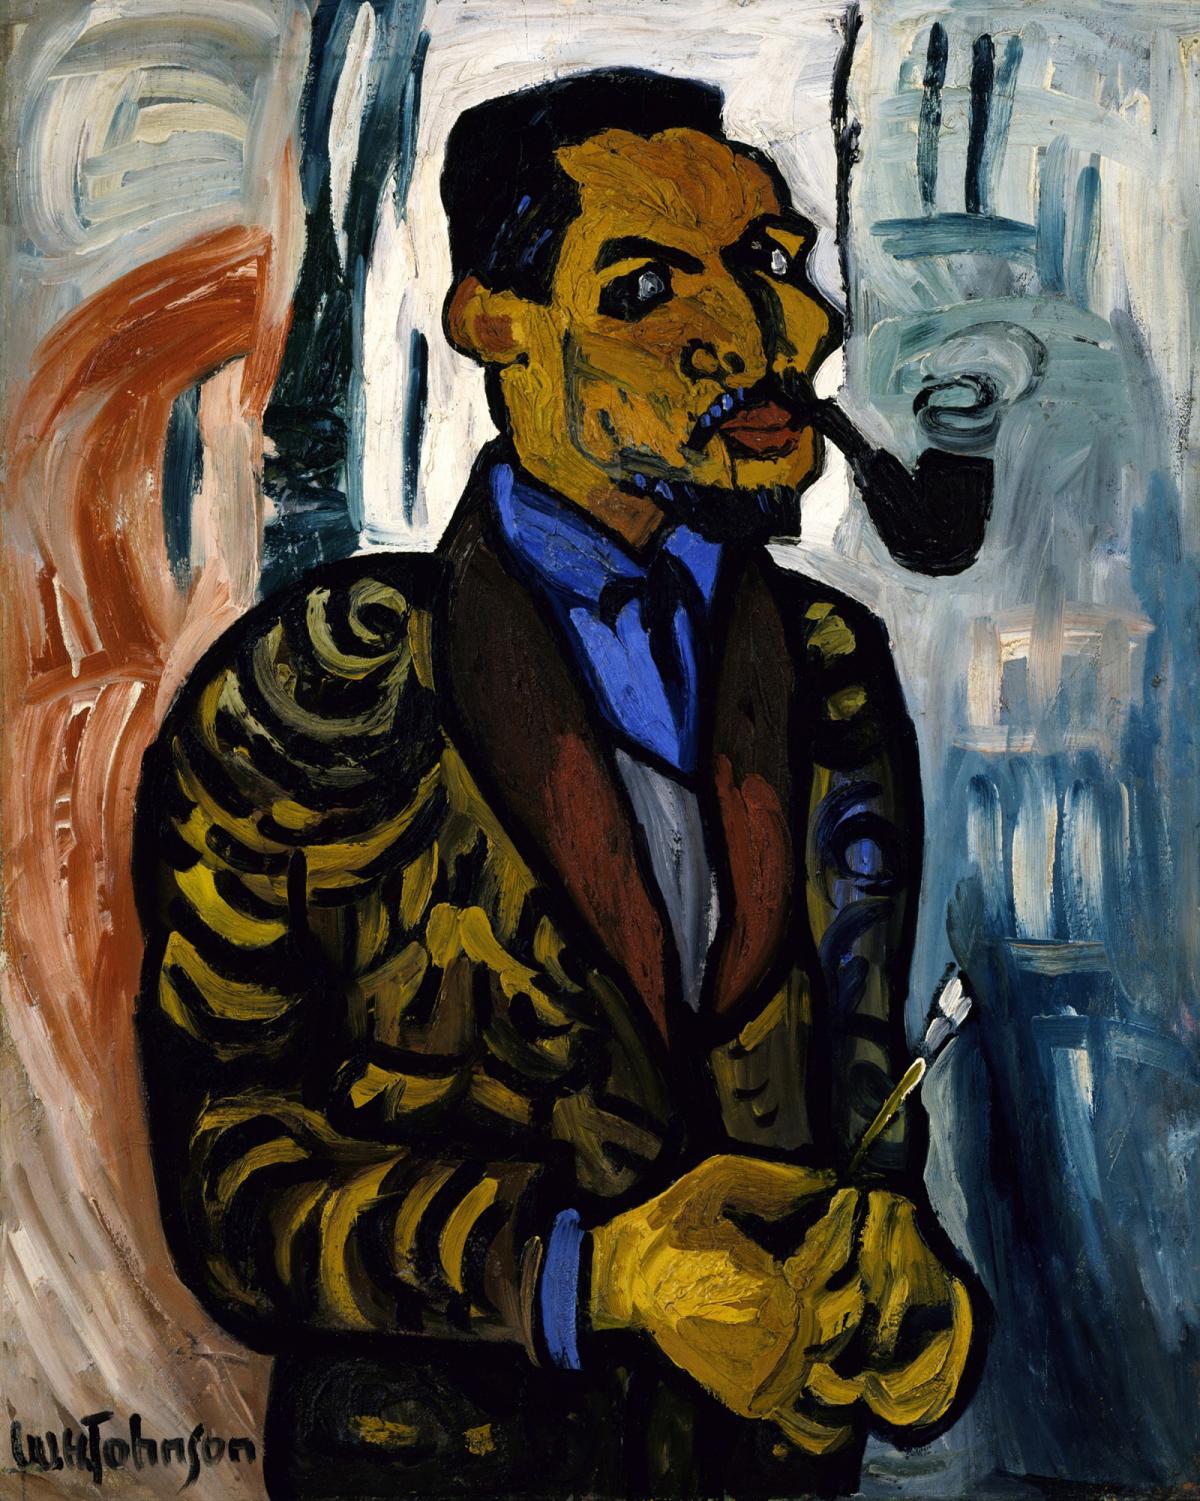 Self-portrait of artist William H Johnson with pipe in mouth and brush in hand.